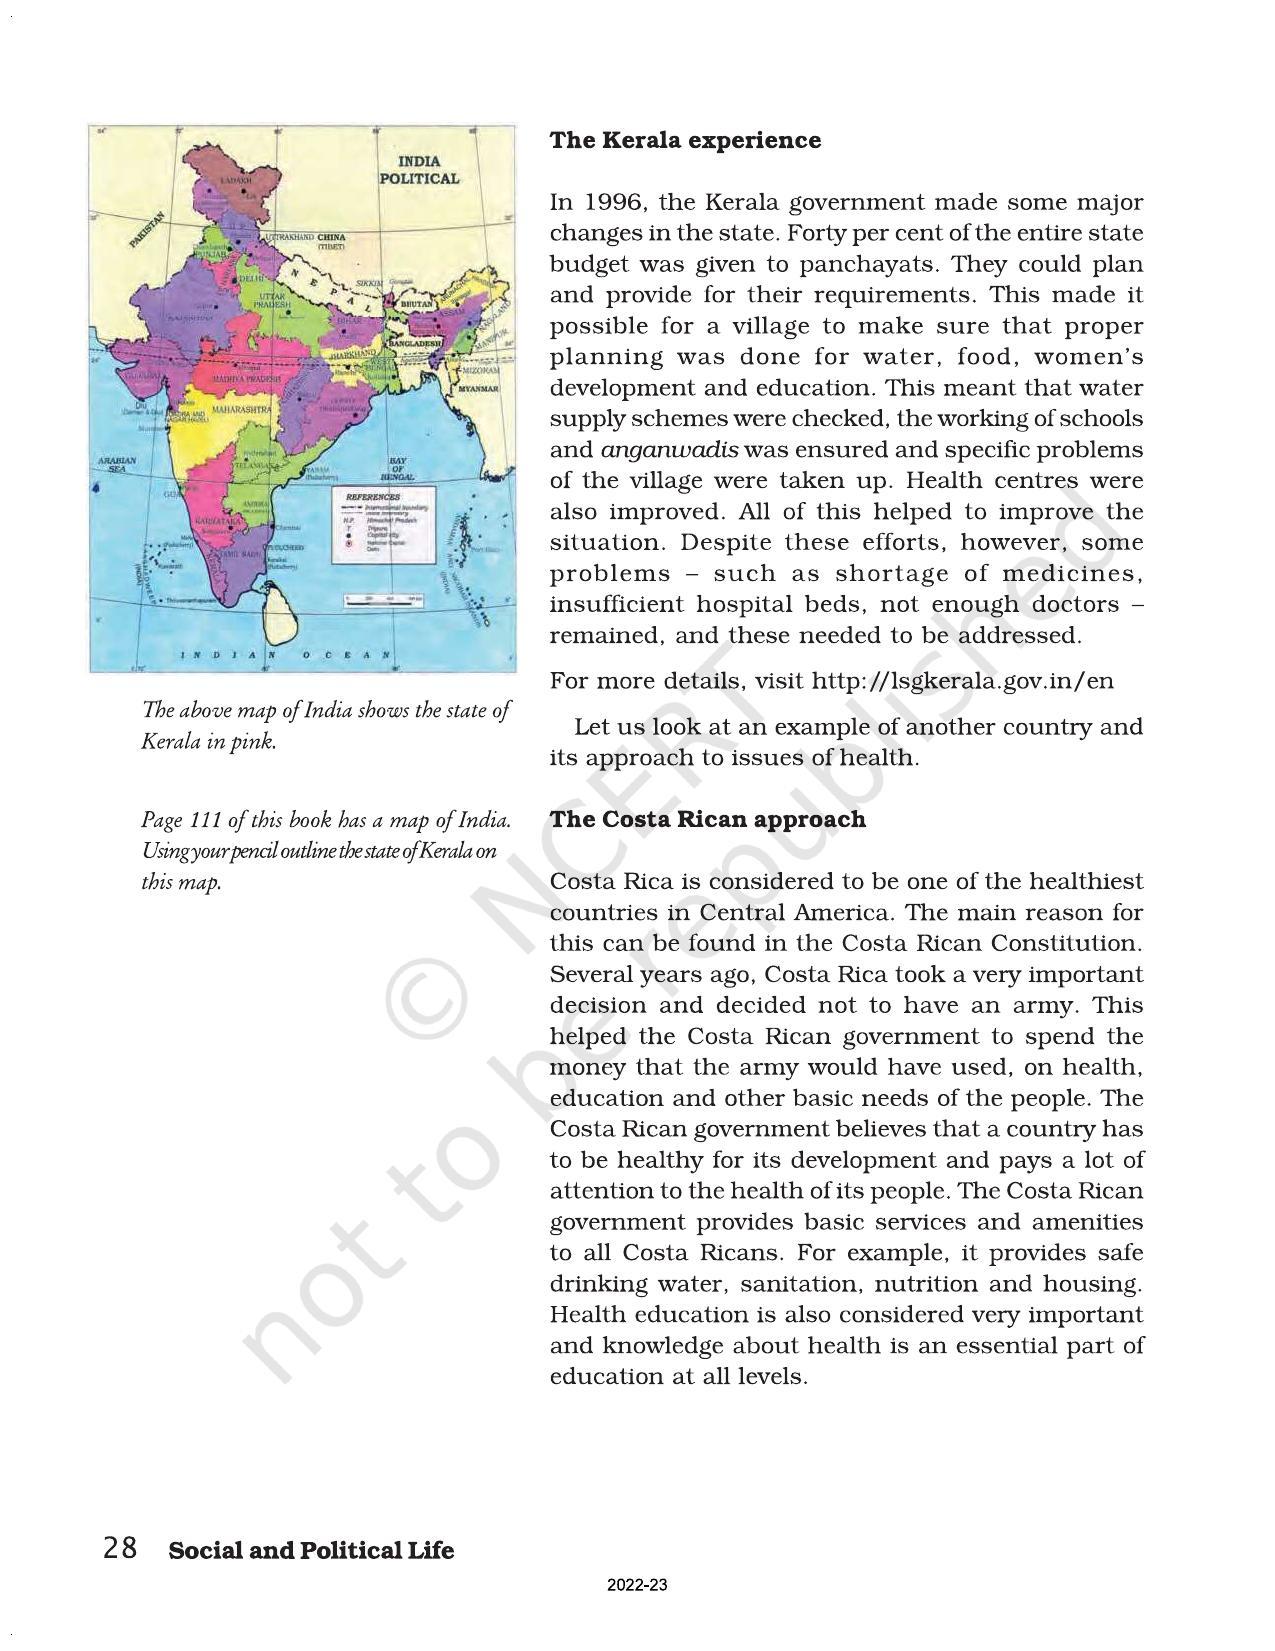 NCERT Book for Class 7 Social Science(Civics): Chapter 2-Role of the Government in Health - Page 13